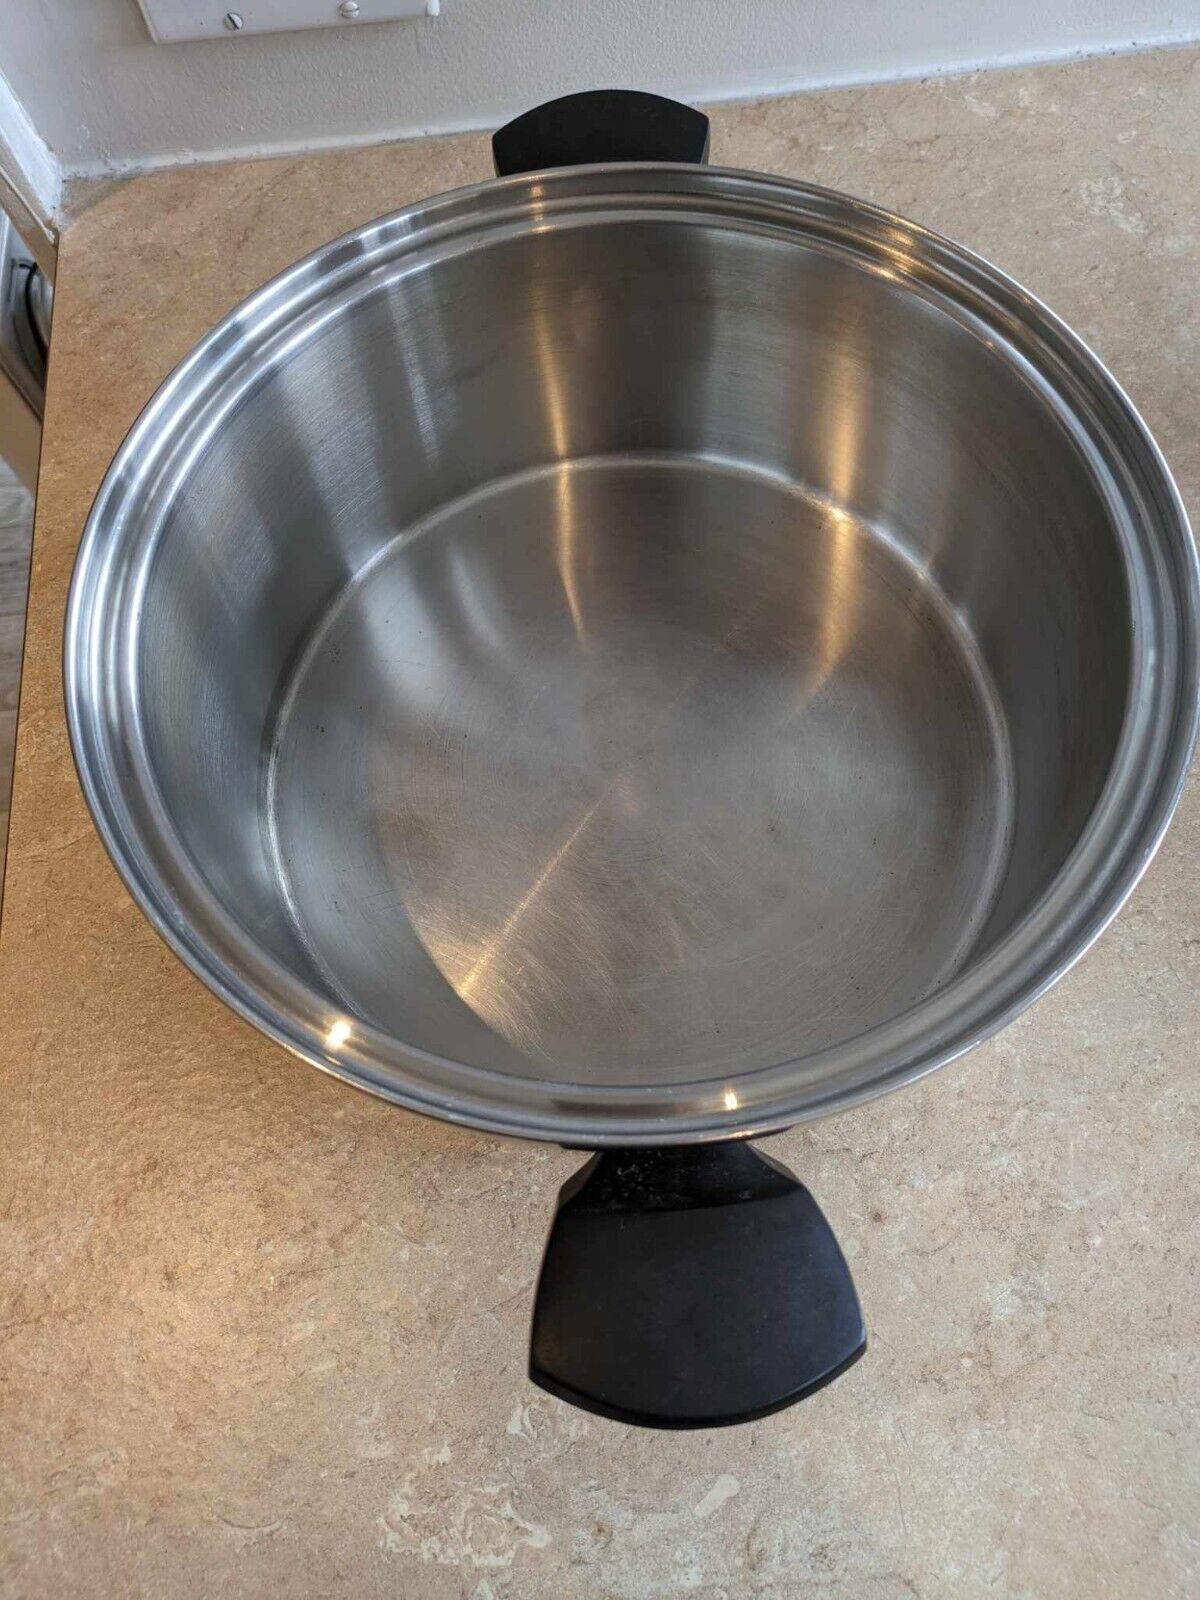 Vintage Lifetime 5.5 Qt 5 Ply T304 Stainless Steel Stock Pot without Lid